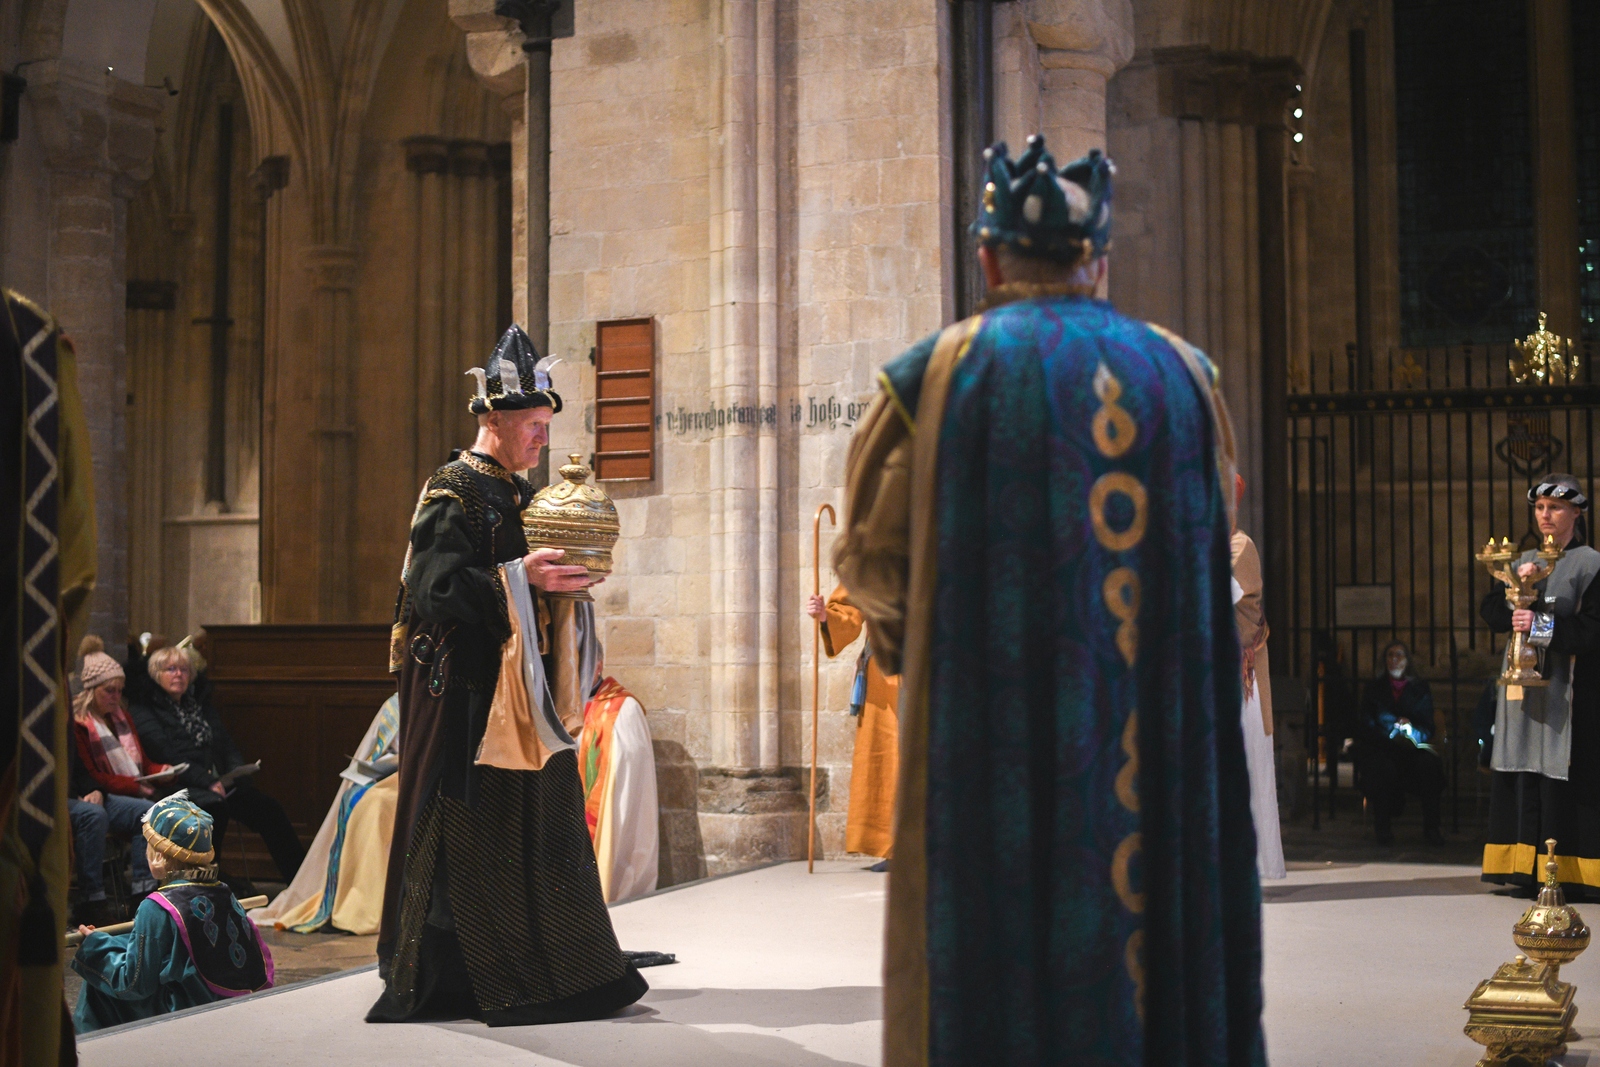 A Magi dressed in black robes carries a gift to the Arundel Screen